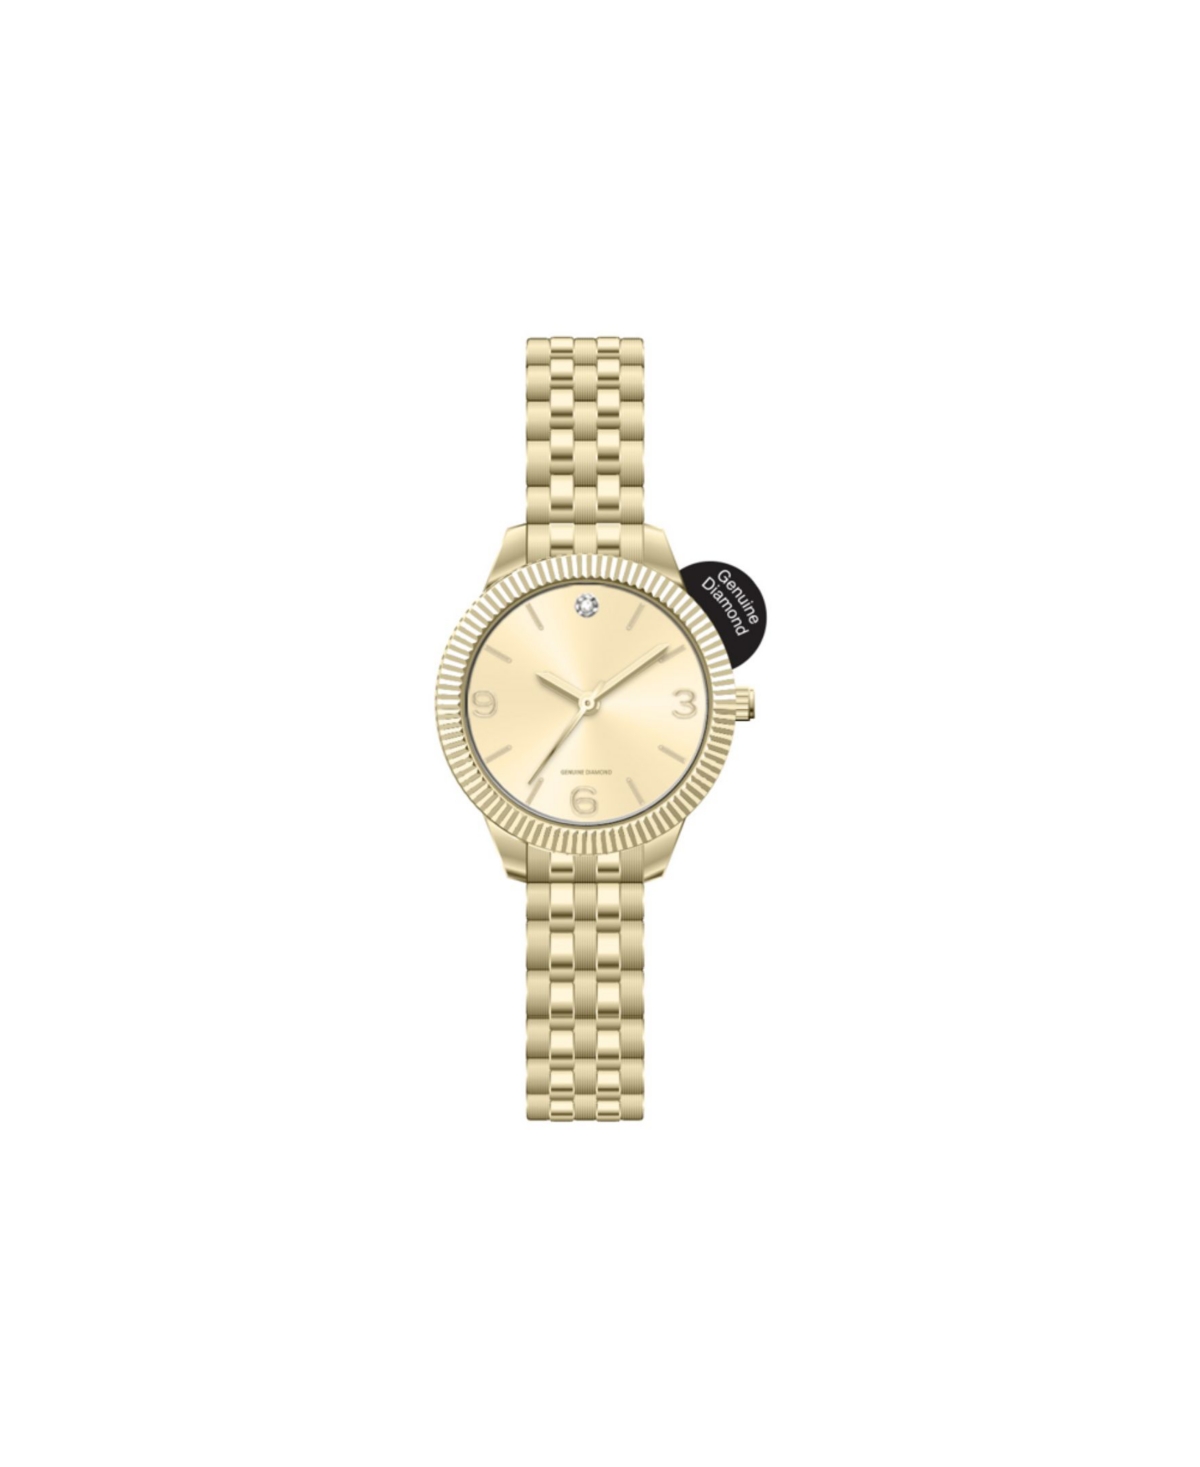 Jessica Carlyle Women's Analog Gold-Tone Metal Alloy Watch 31mm